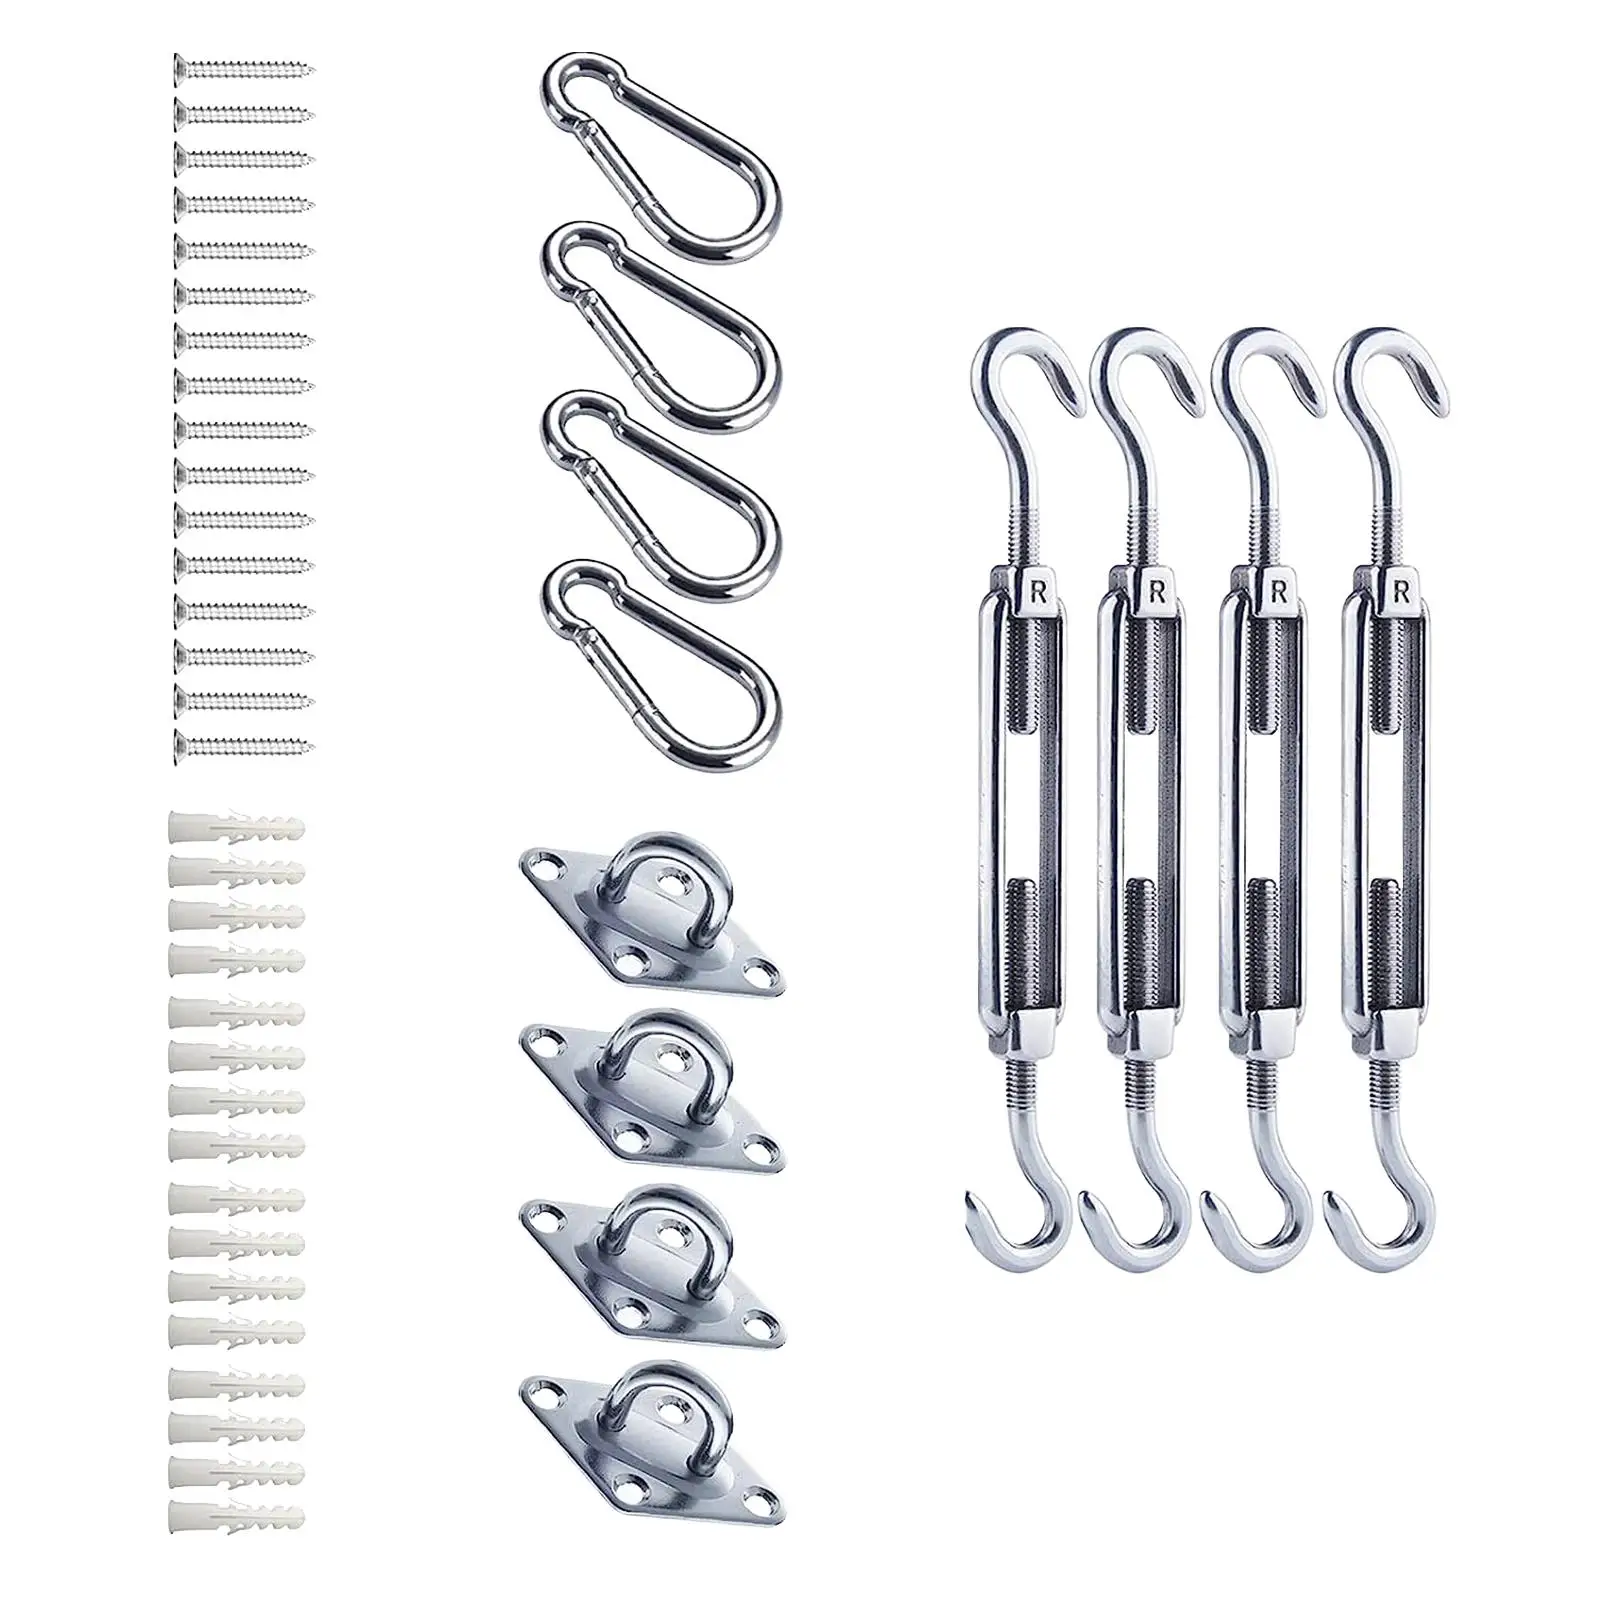 Awning Attachment Set Sunshades Sail Fixing Accessories Fittings Tool Installation Replacement Canopy Installation Kits for Lawn